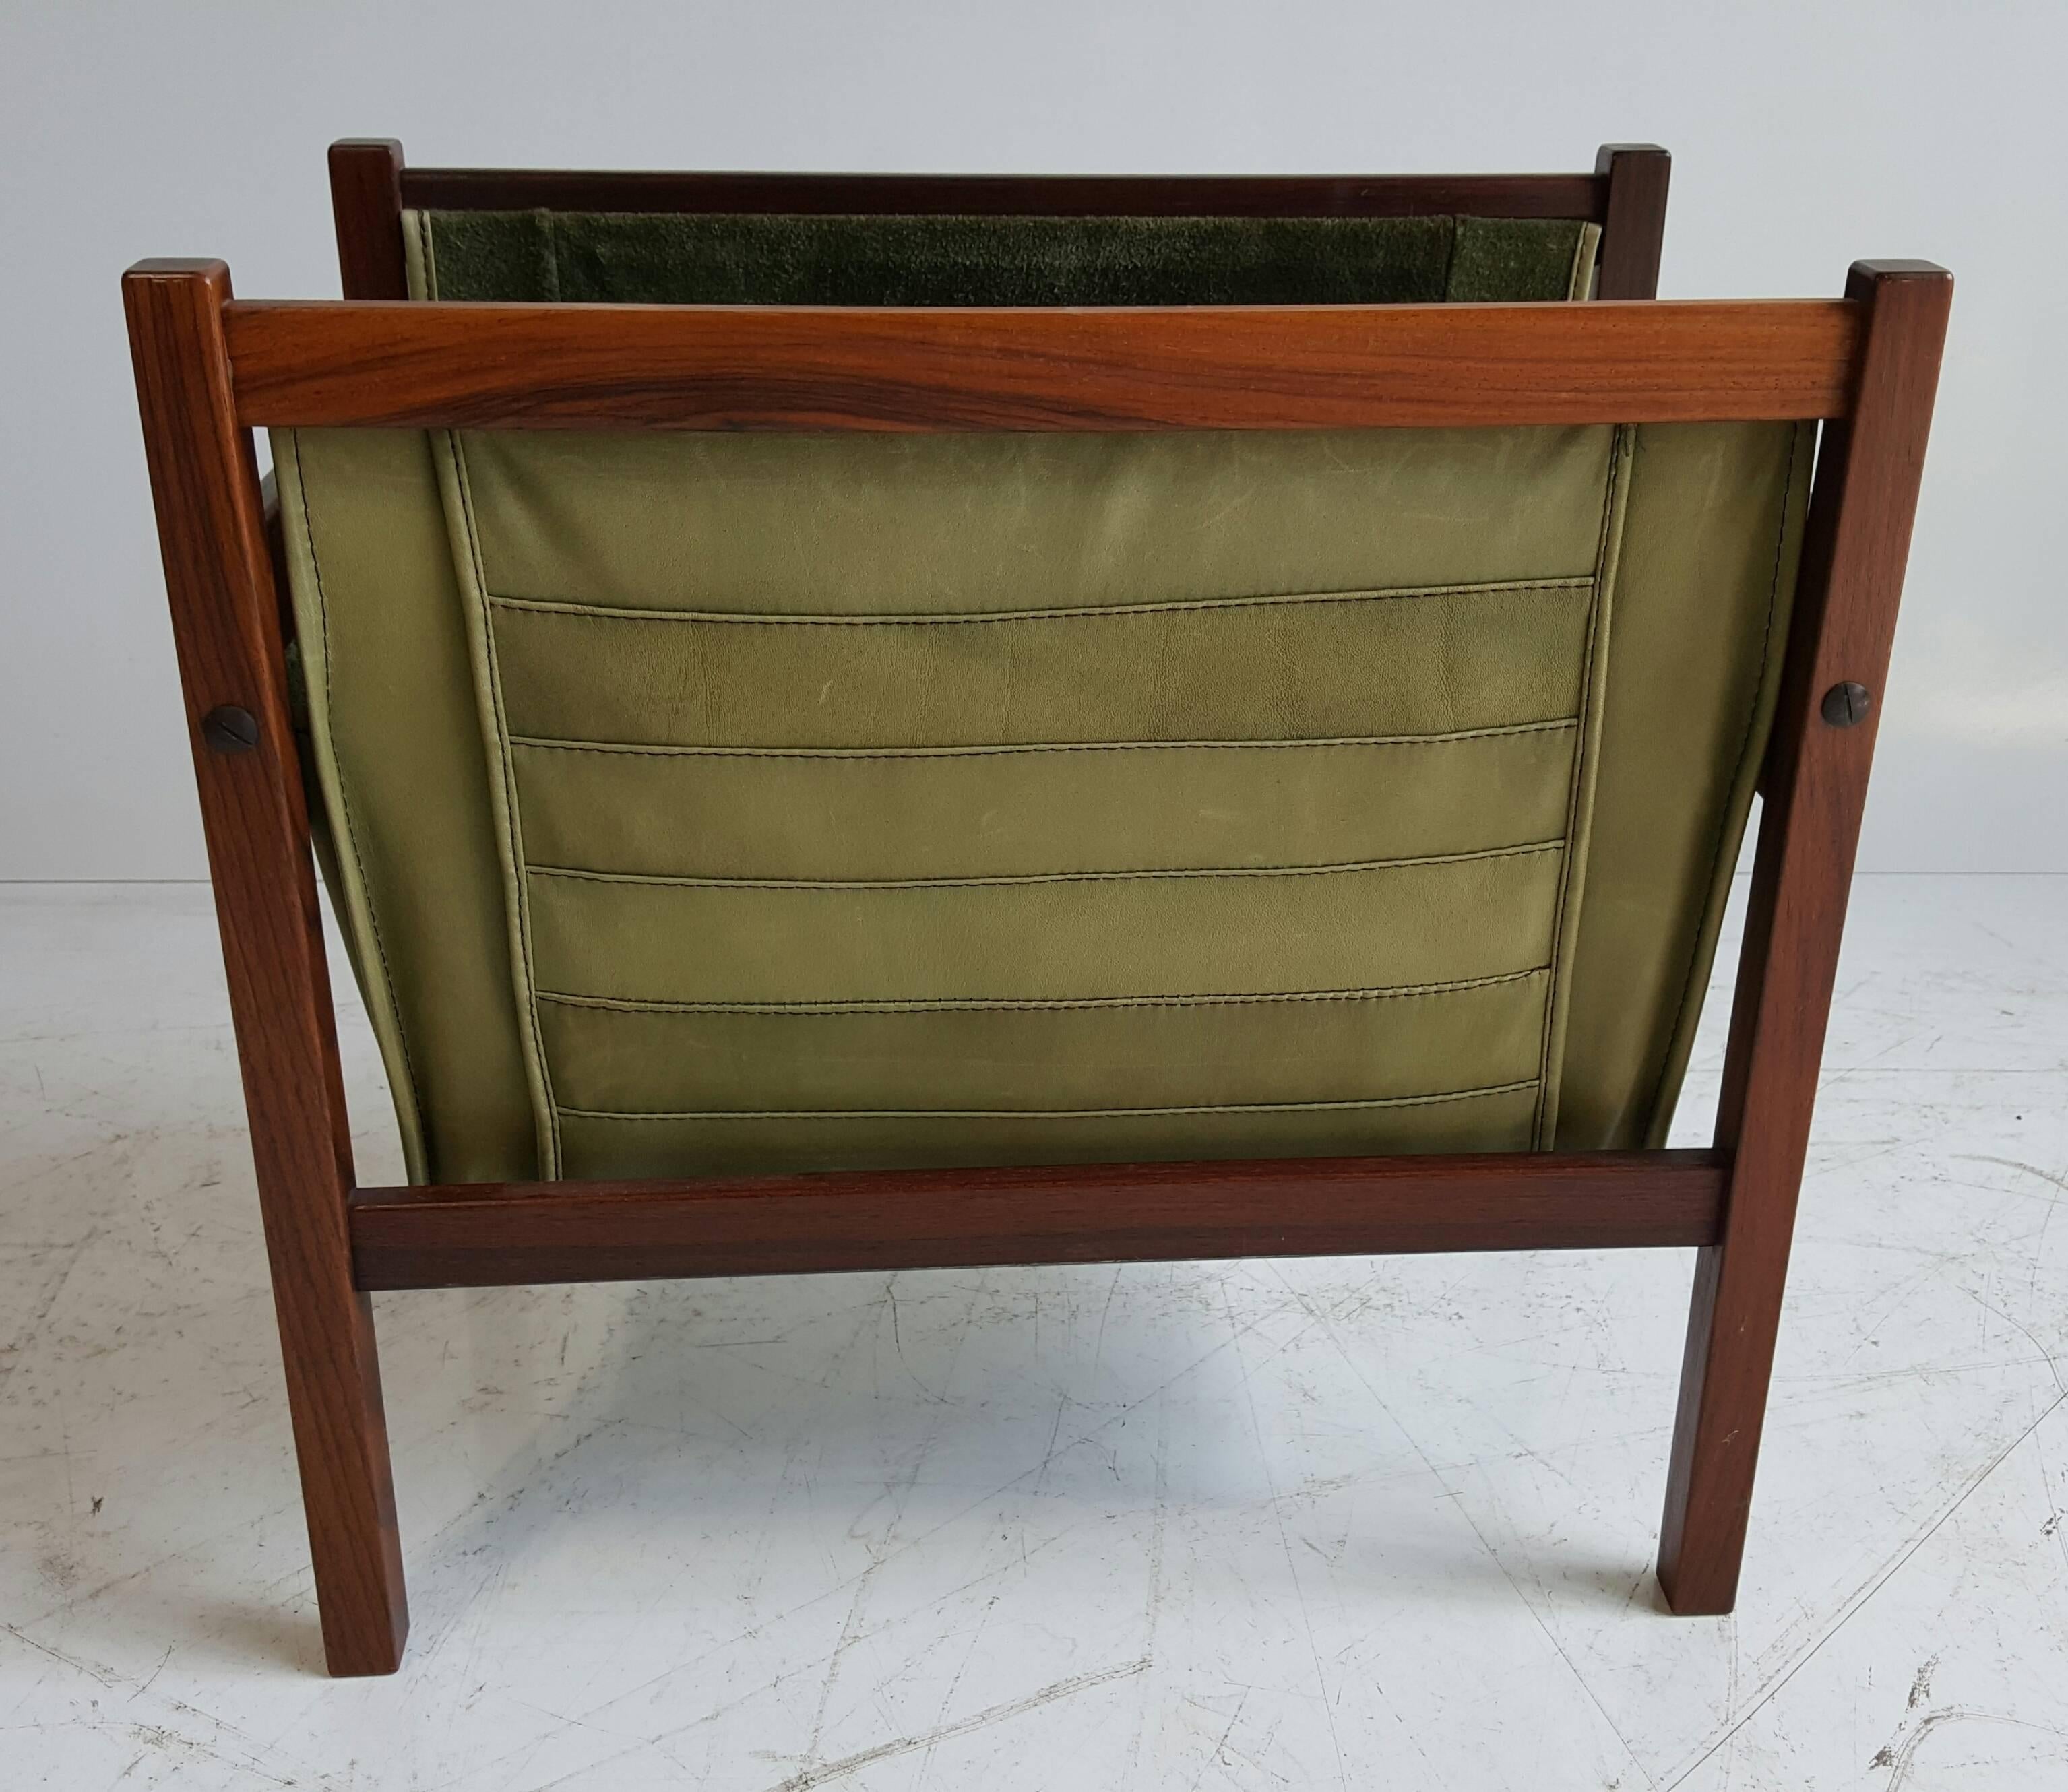 Danish rosewood and leather magazine/newspaper holder, wonderful design, quality as to expect from cabinet makers from Denmark, beautiful moss green hand-stiched leather, retains original rosewood insert (often missing.)